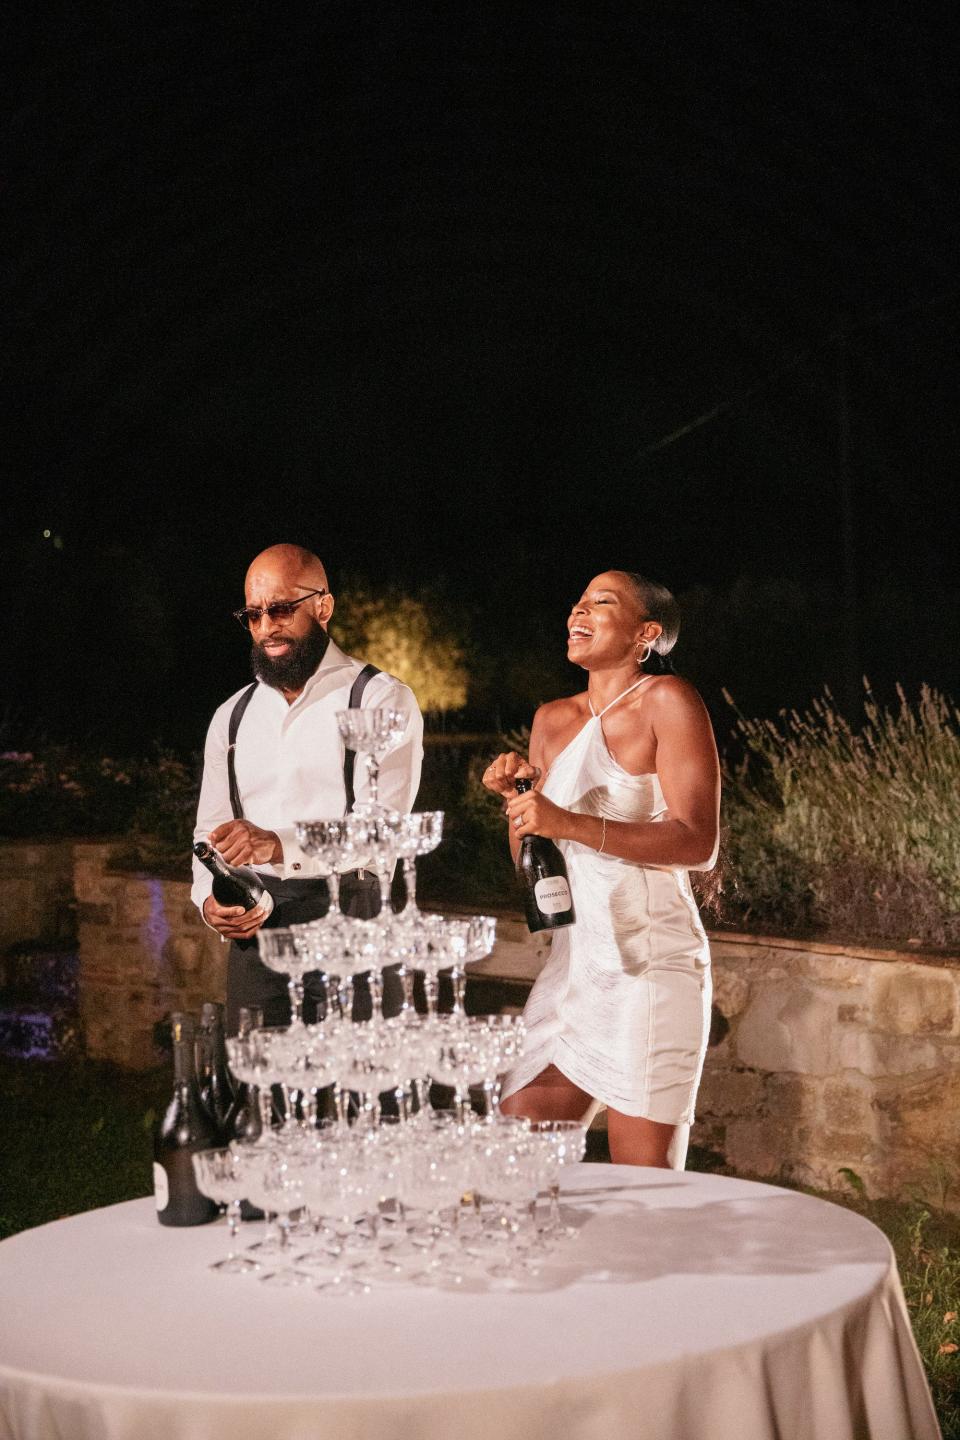 A bride and groom laugh as they pop champagne at their wedding.